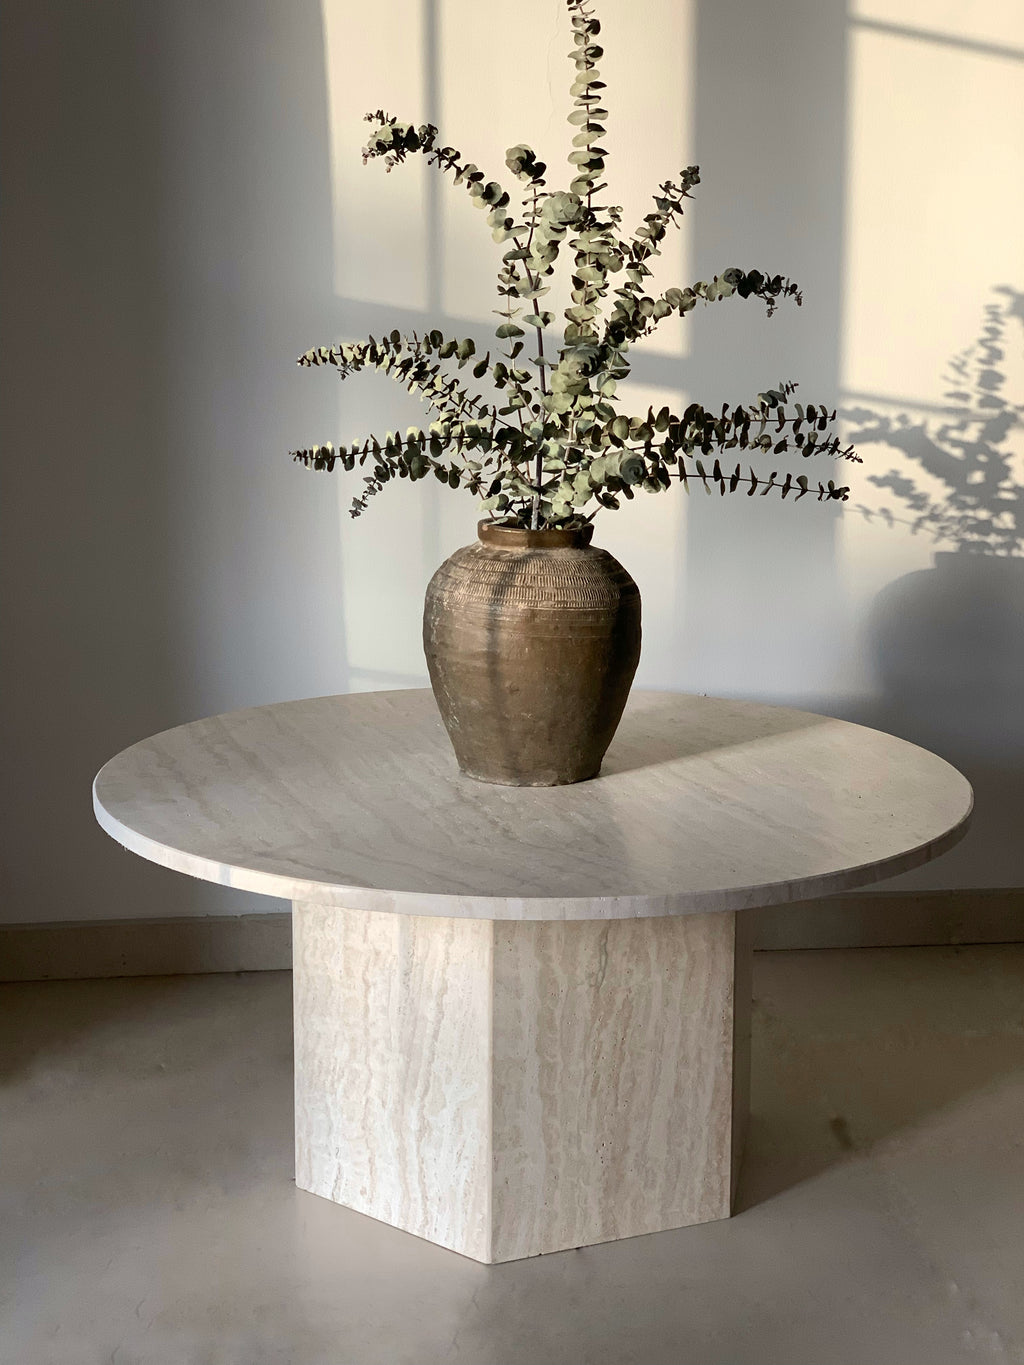 Round light beige coffee table with hexagonal base, displaying vase with stems.